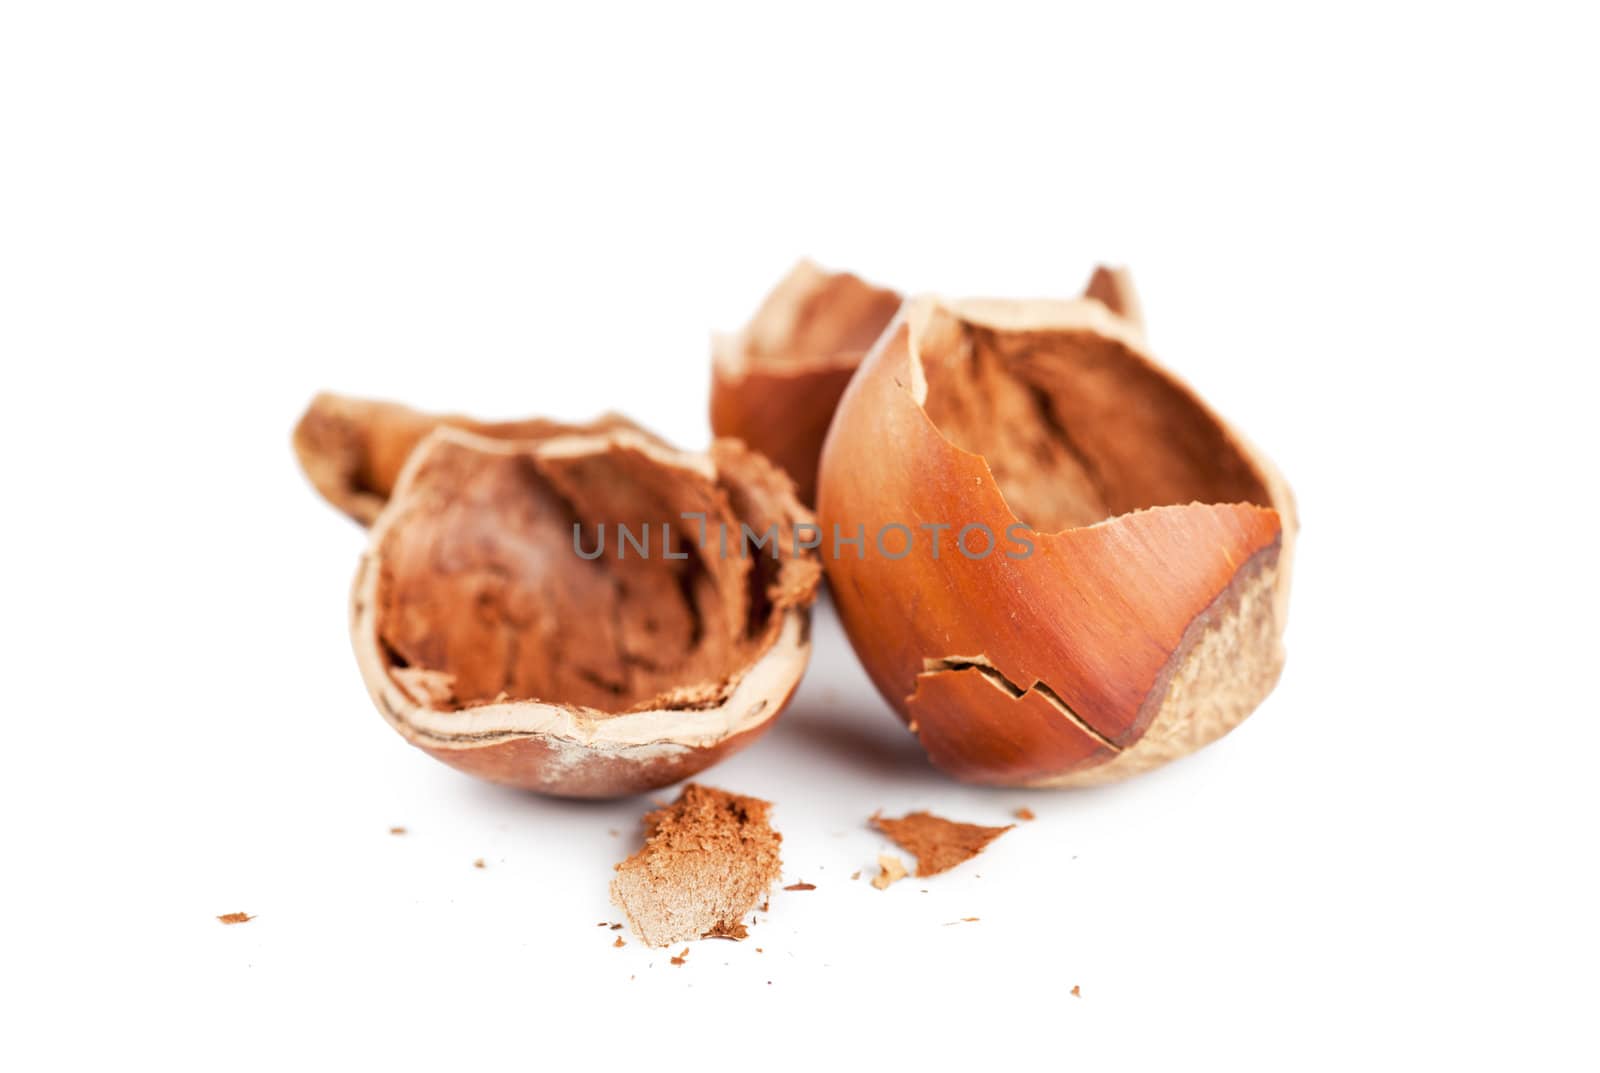 Closeup view of cracked hazelnuts over white background